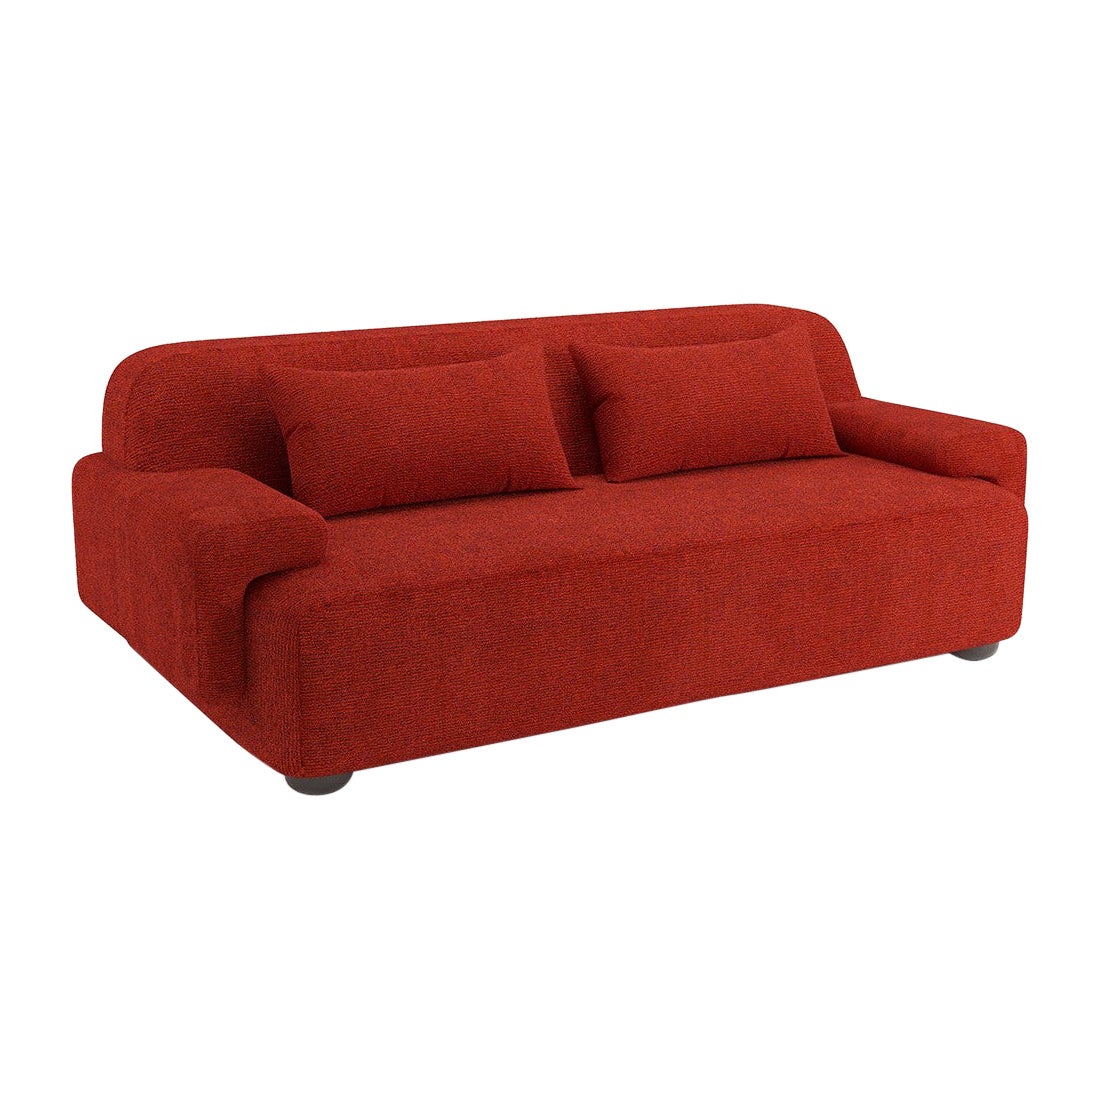 Popus Editions Lena 2.5 Seater Sofa in Rust Megeve Fabric with Knit Effect For Sale